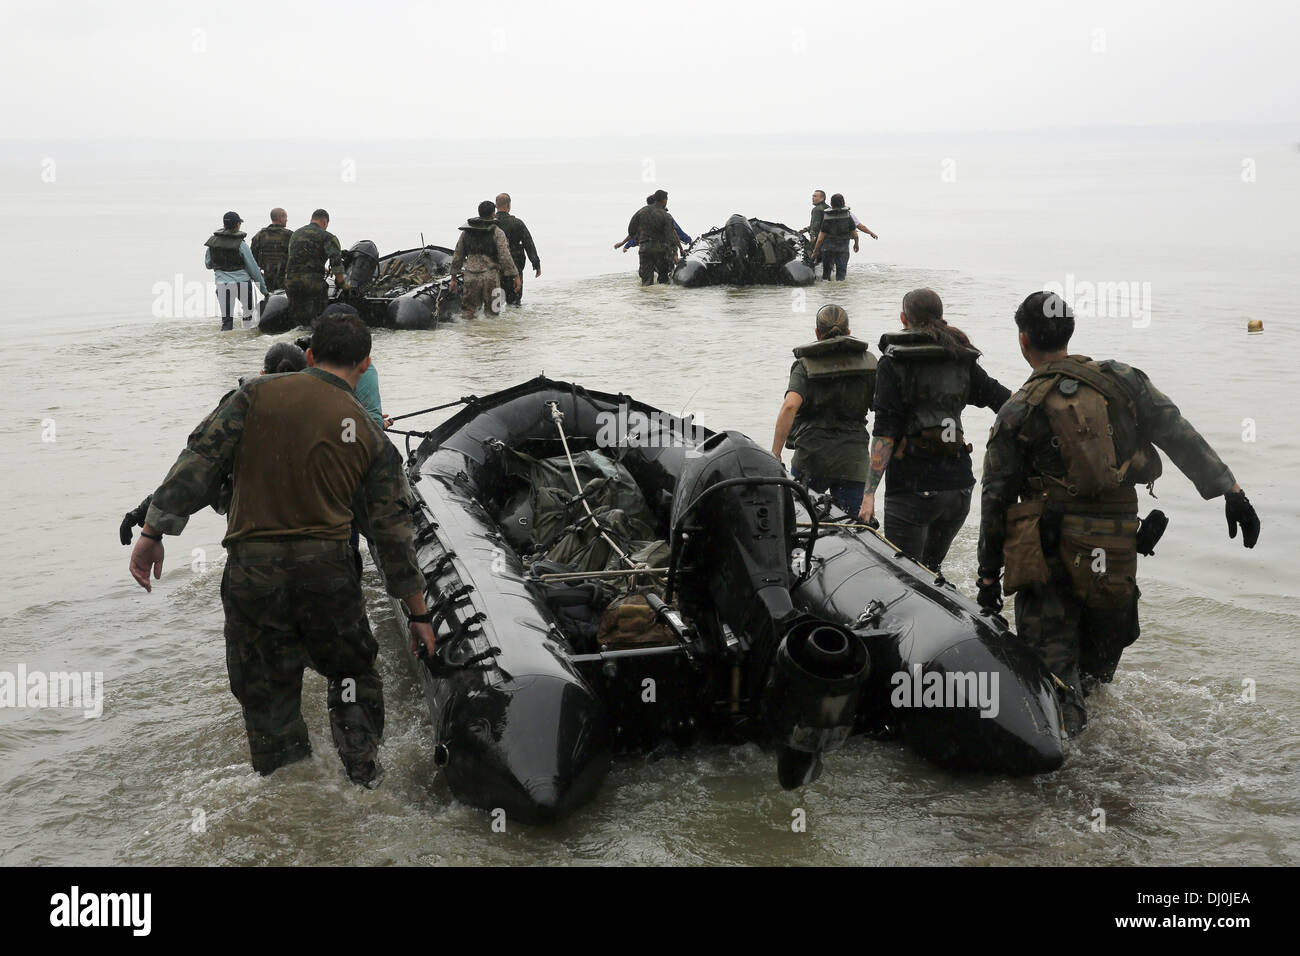 US Marine Corps Special Operations commandos prepare to transport participants of a Jane Wayne Day event via zodiac boats October 19, 2013 in Camp Lejeune, NC. The event allowing wives of MARSOC personnel to experience firsthand mission training. Stock Photo